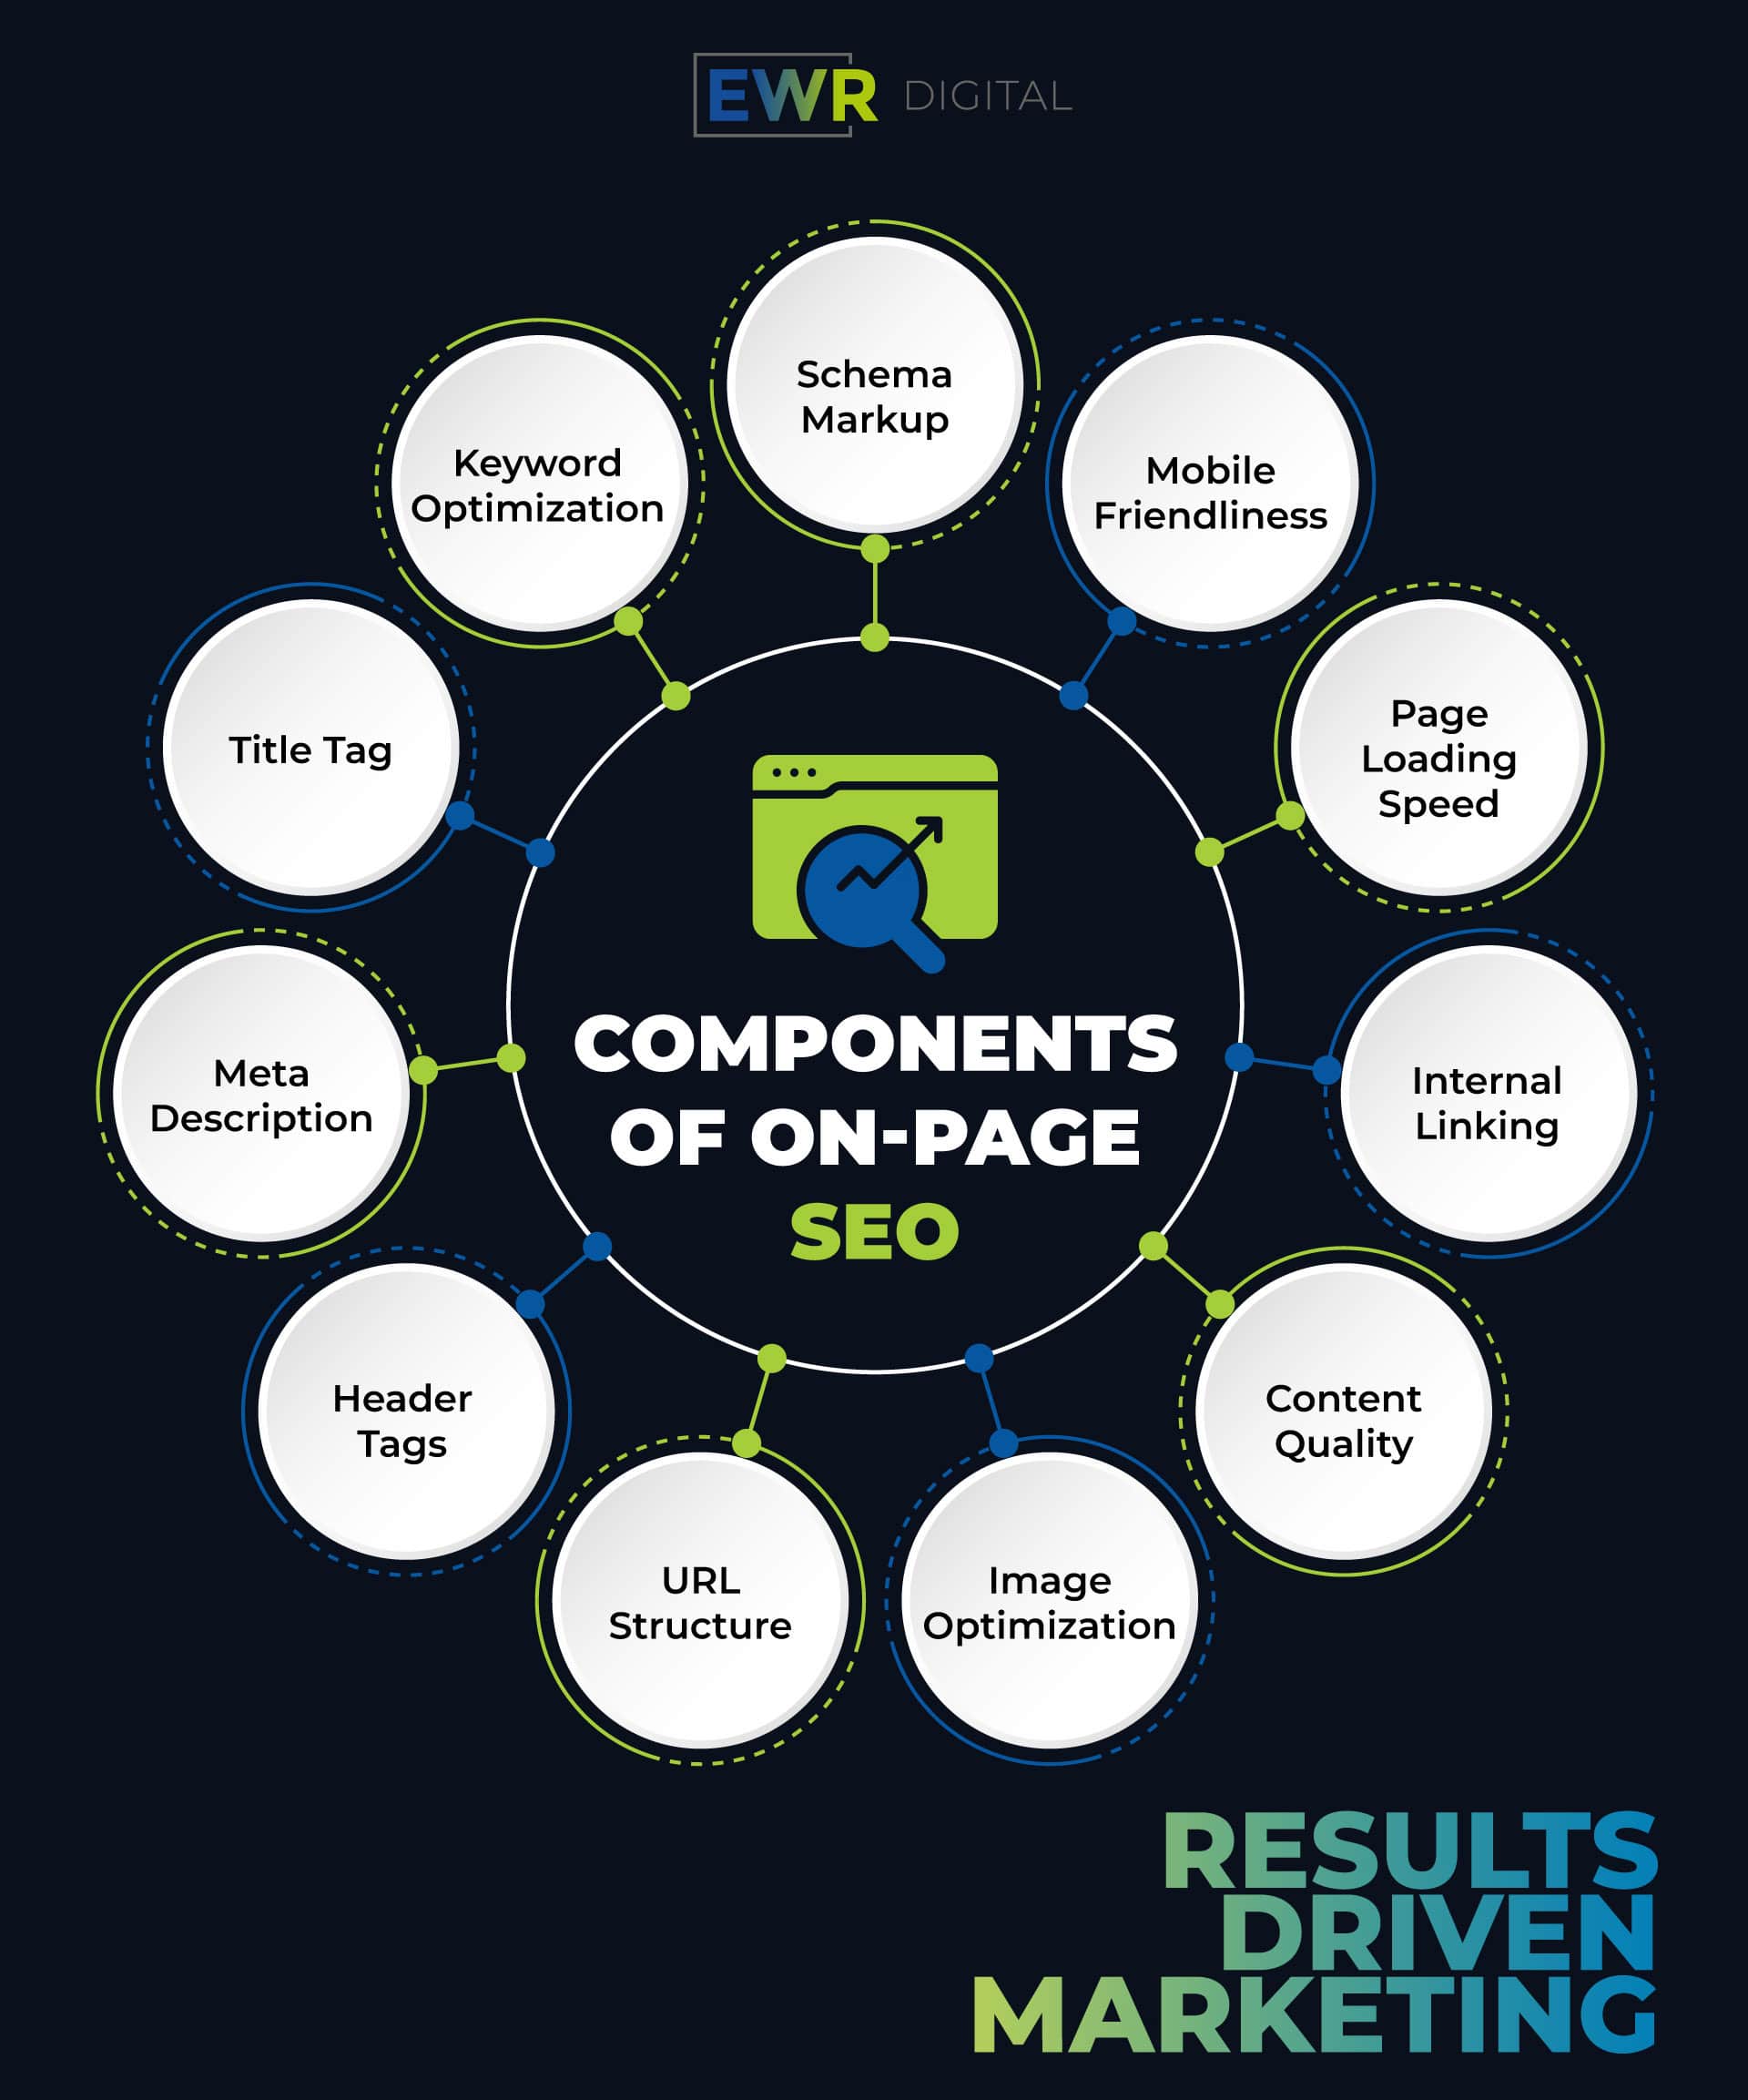 Keyword Optimization, Schema Markup, Mobile Friendliness, Page Loading Speed, Internal Linking, Content Quality, Image Optimization, URL Structure, Header Tags, Meta Description, Title tag